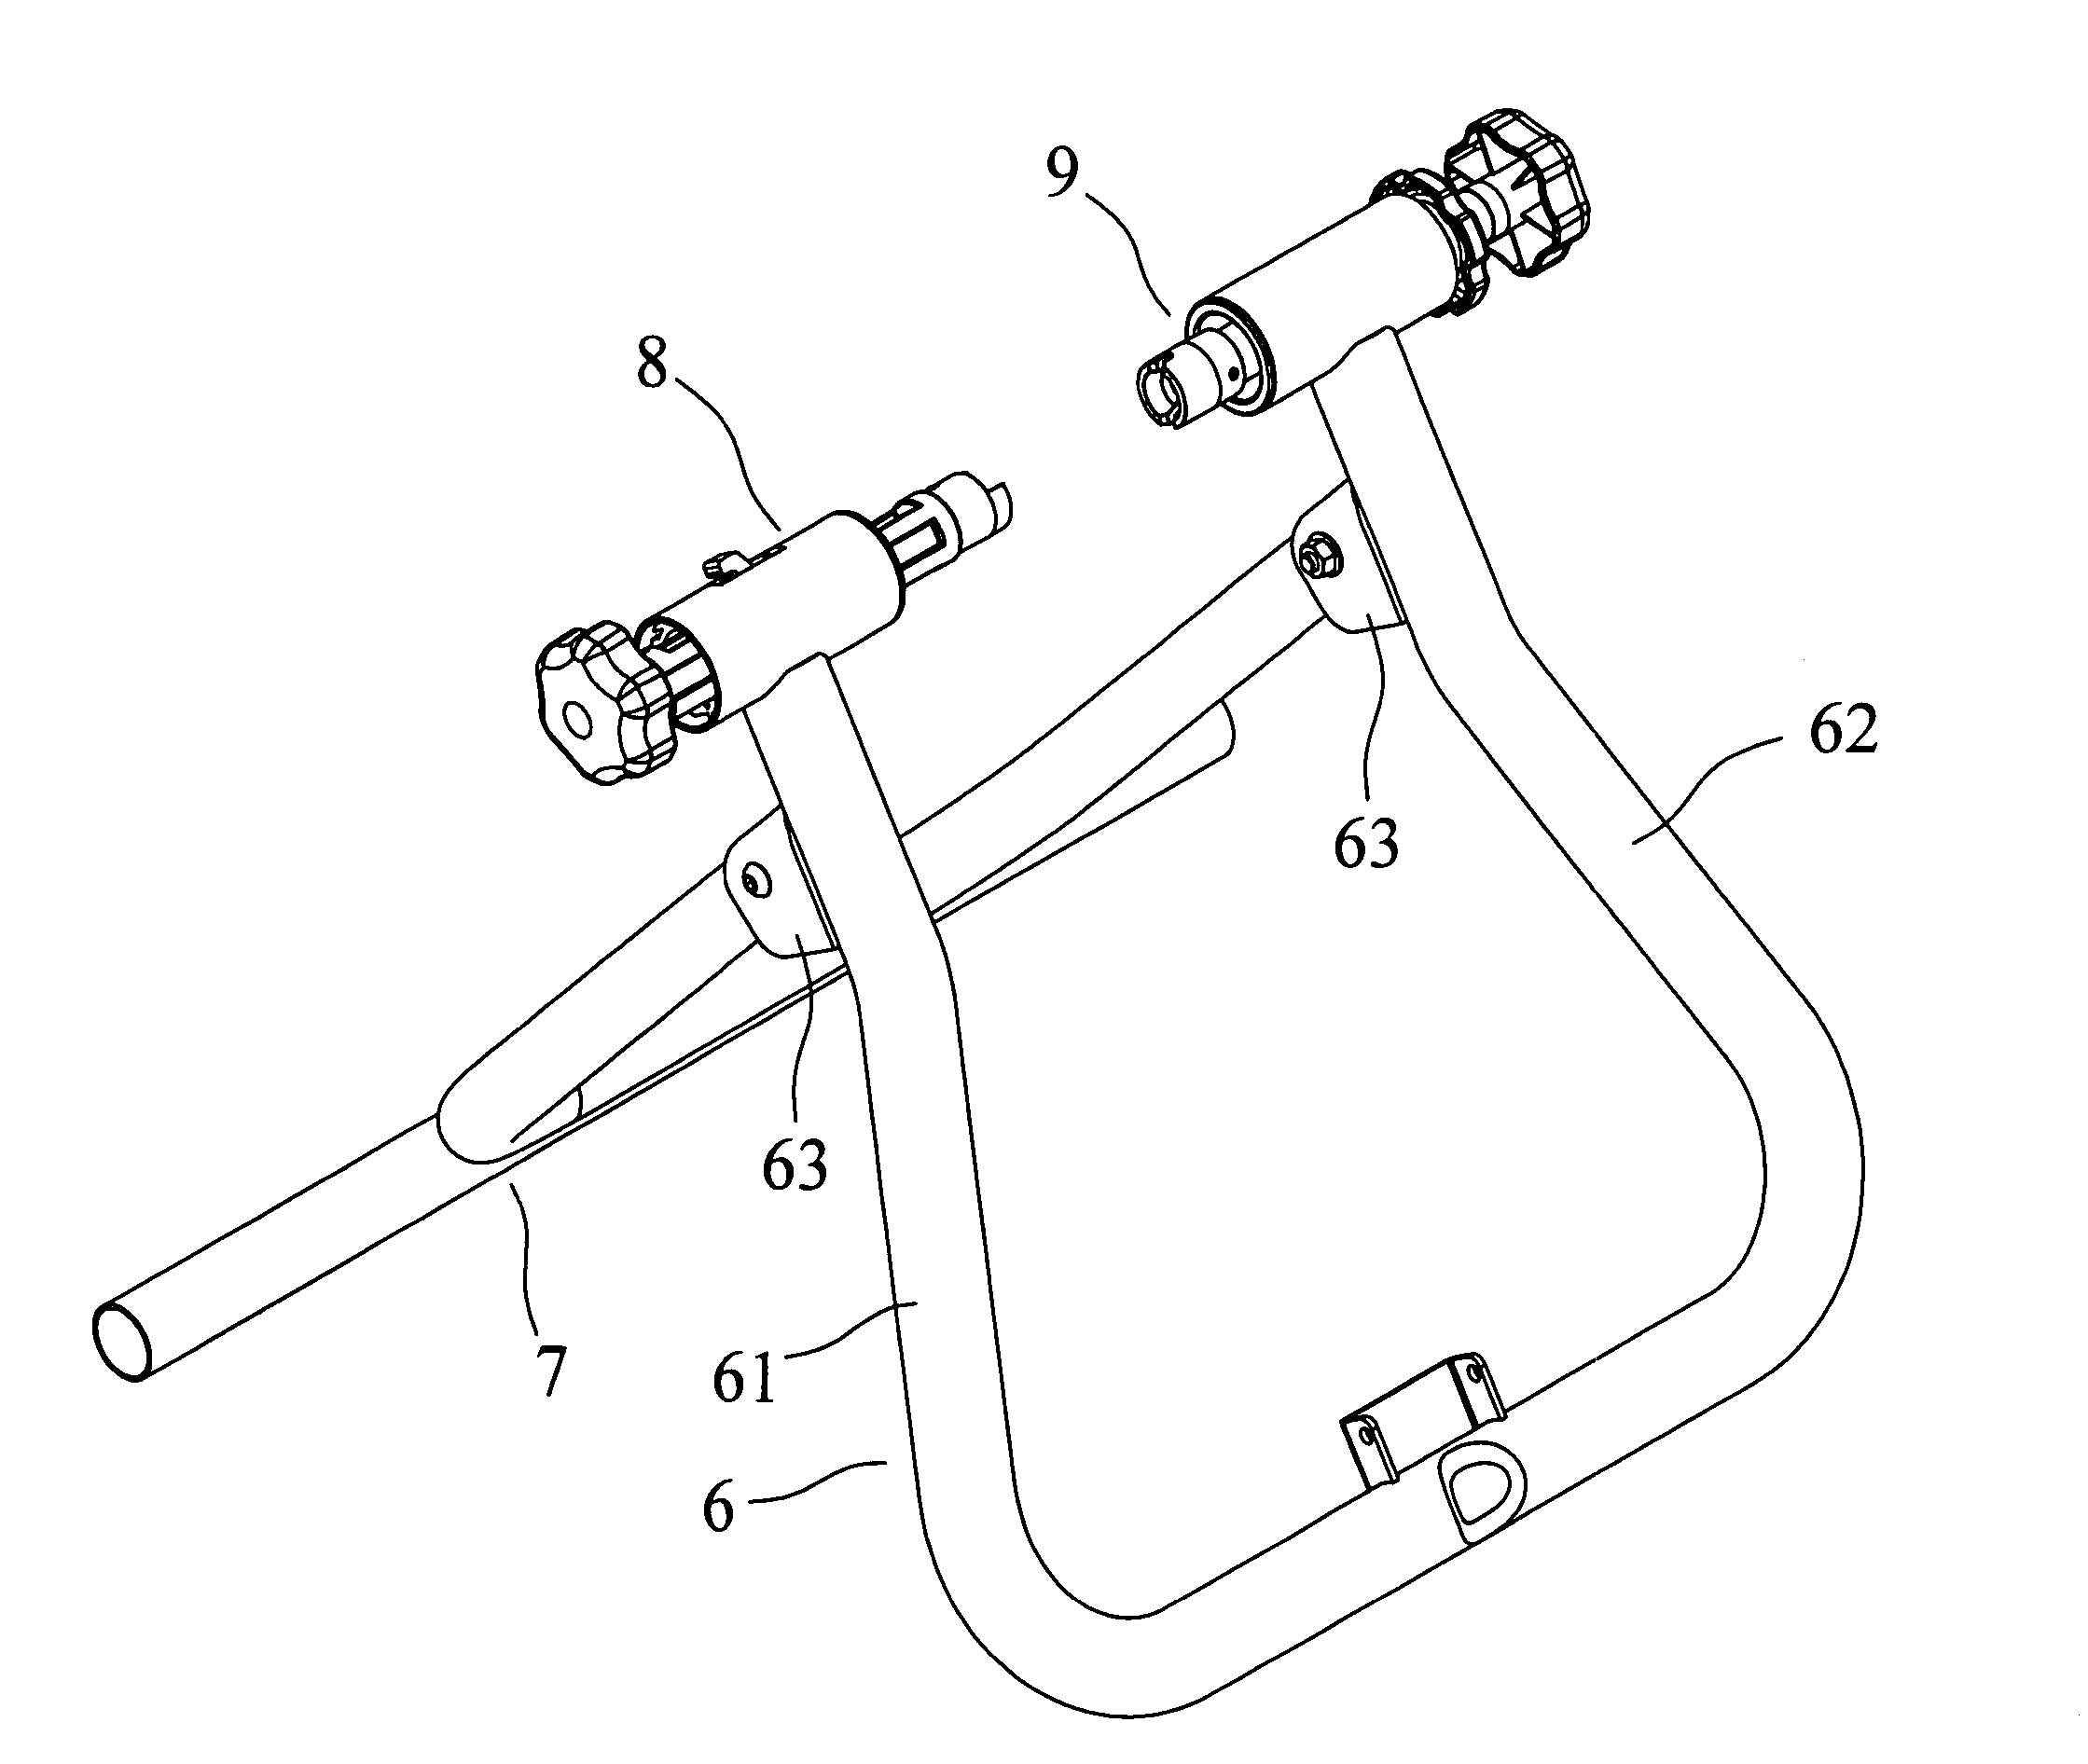 Rear wheel axle support assembly for a fitness bicycle